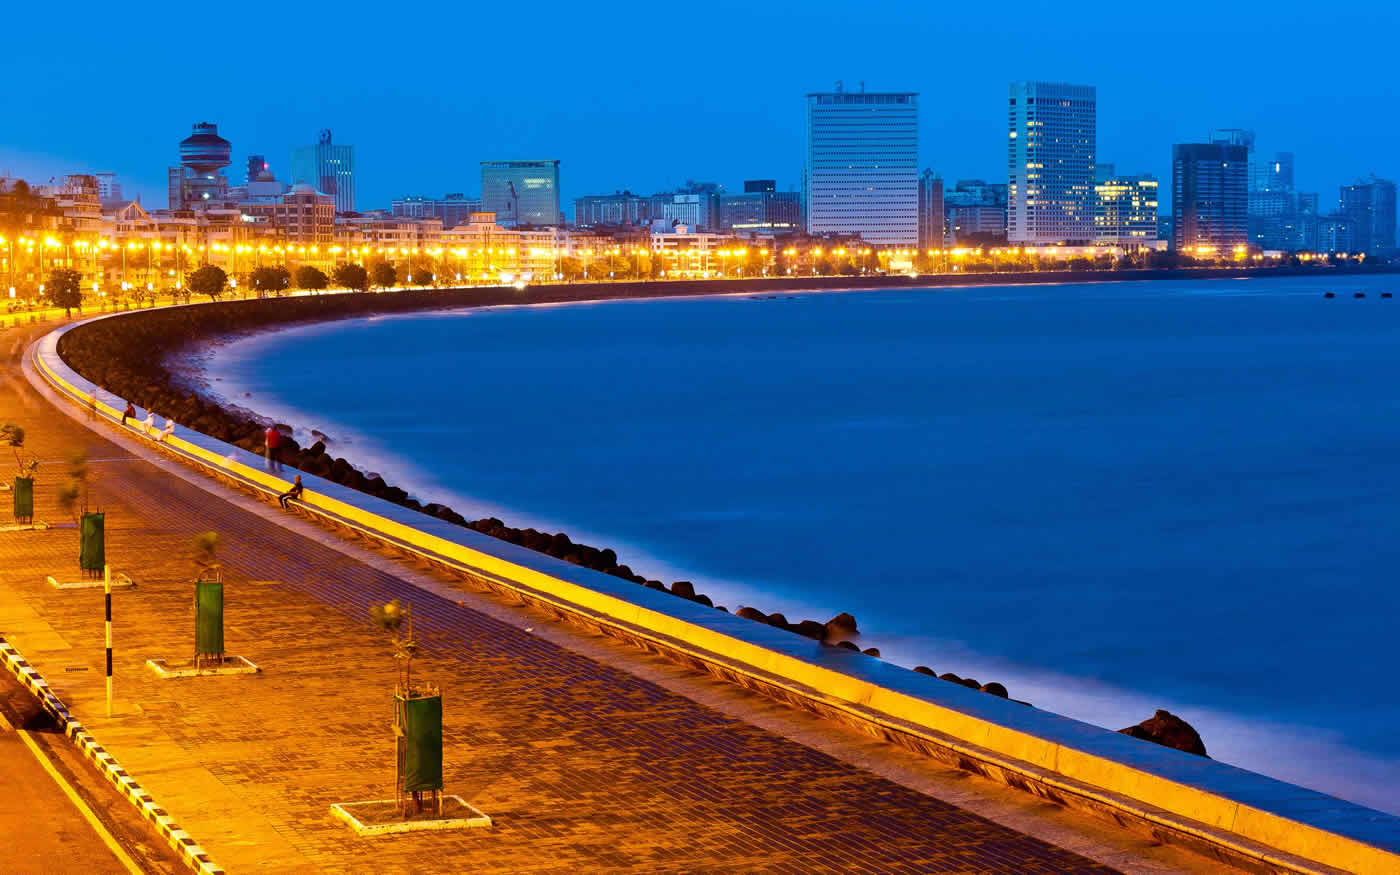 Insider's travel guide to Mumbai: Seaside cities are more